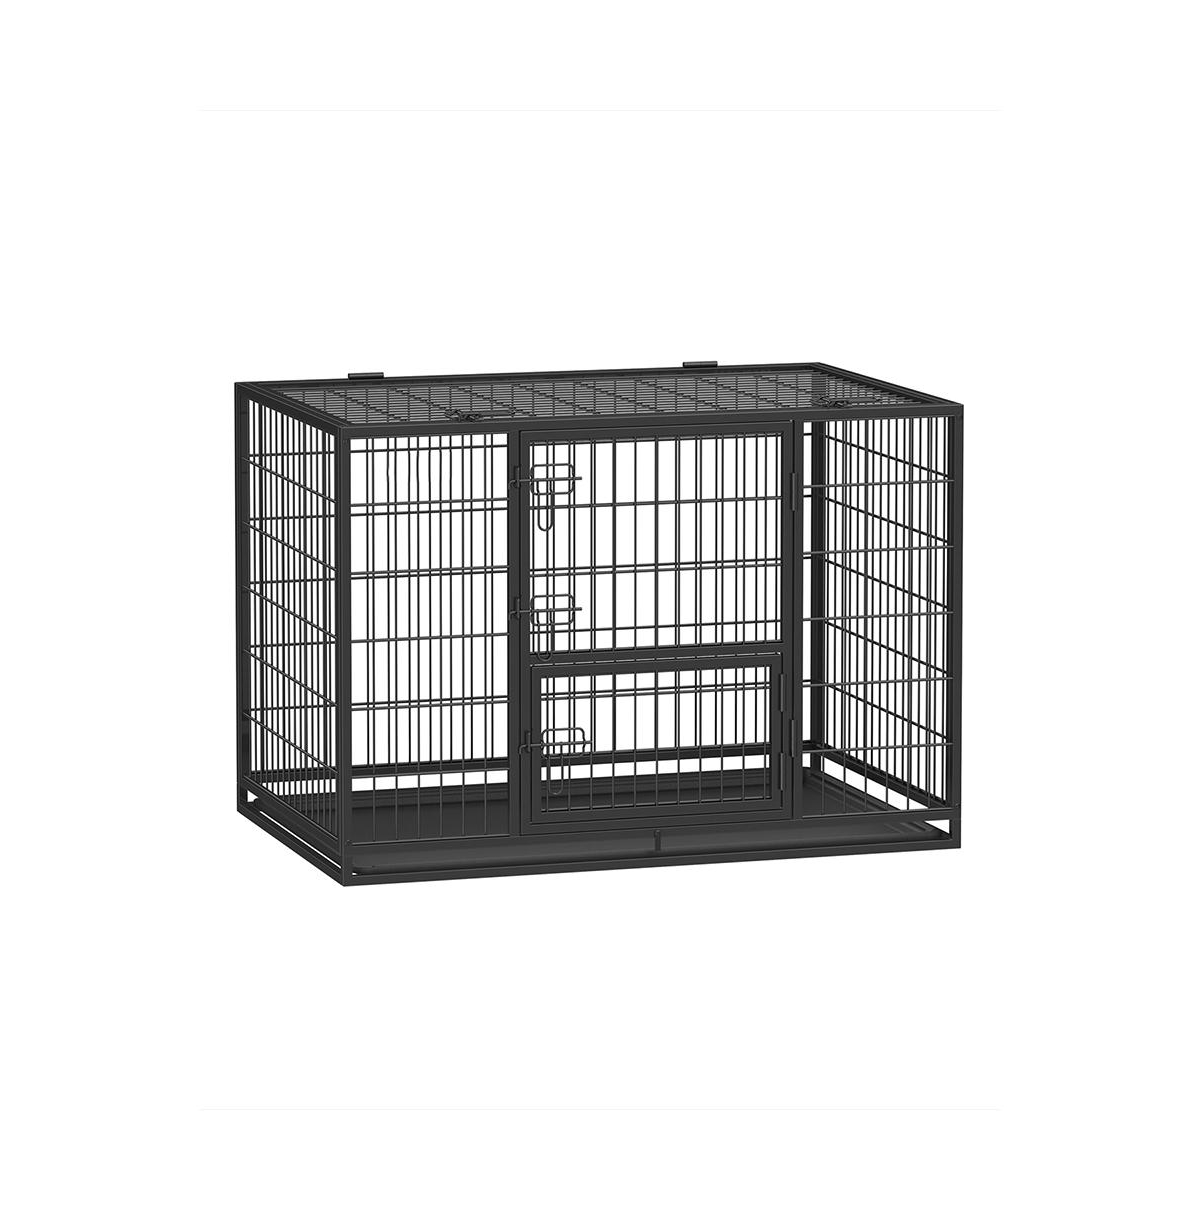 Heavy-Duty Dog Crate, Dog Kennel for Large and Medium Dogs, Anti-Escape, Double Removable Door - Black